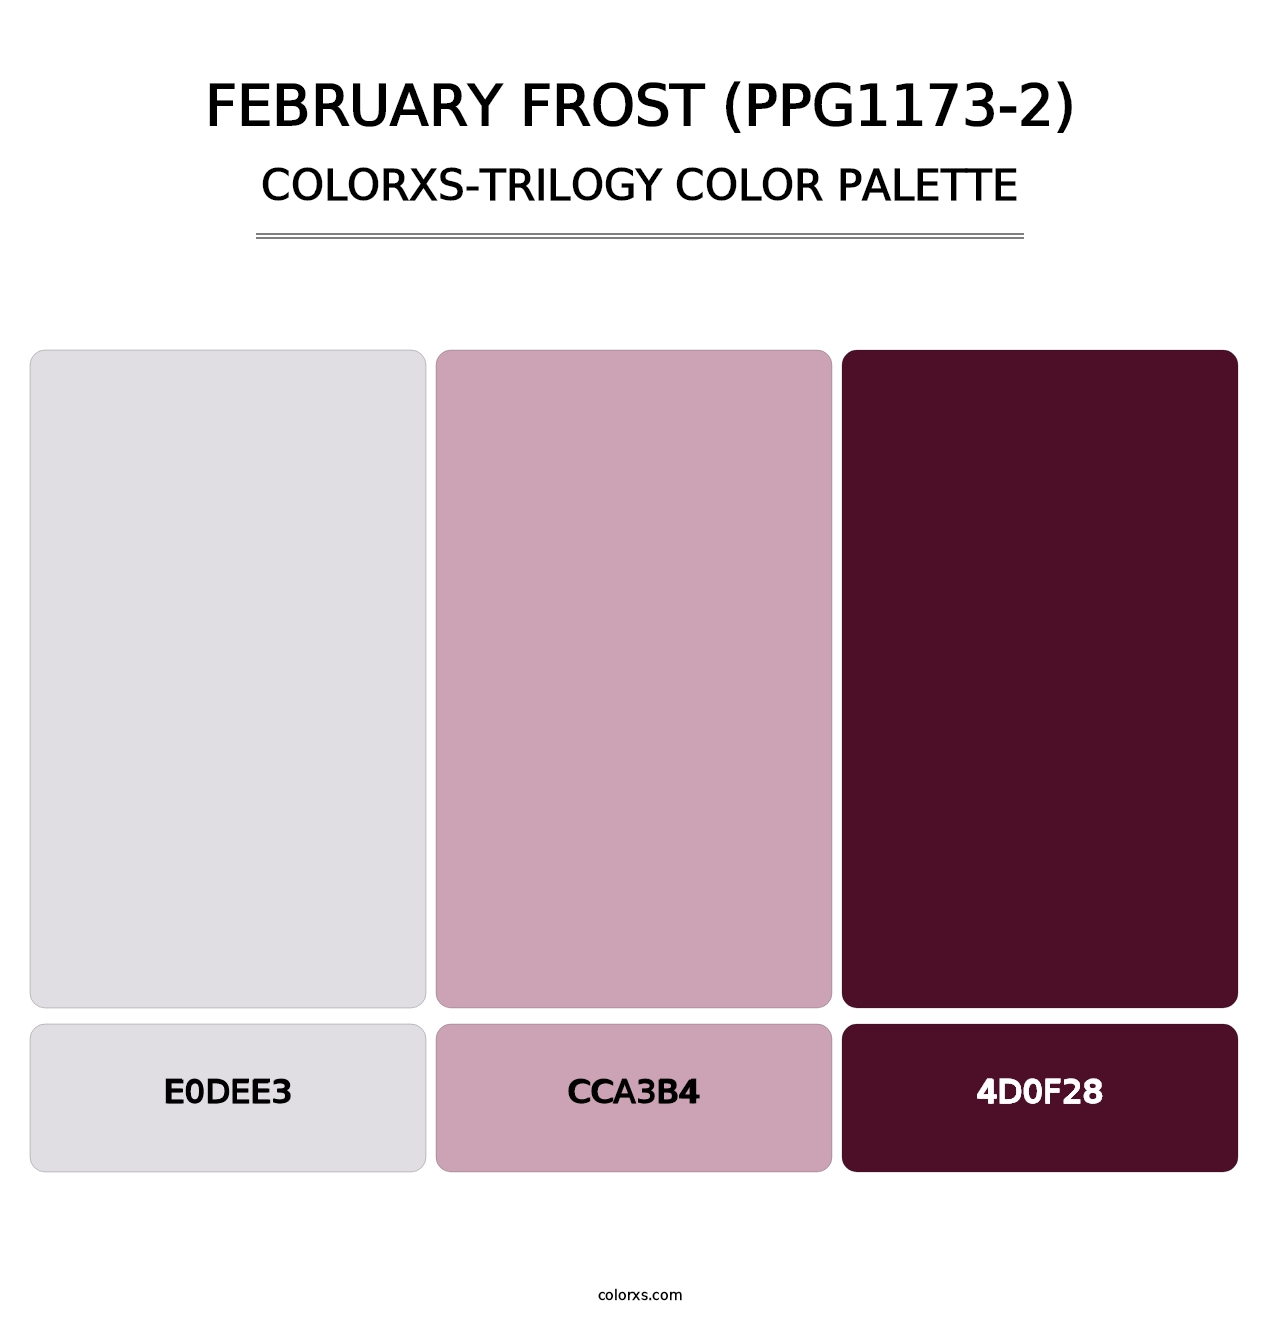 February Frost (PPG1173-2) - Colorxs Trilogy Palette